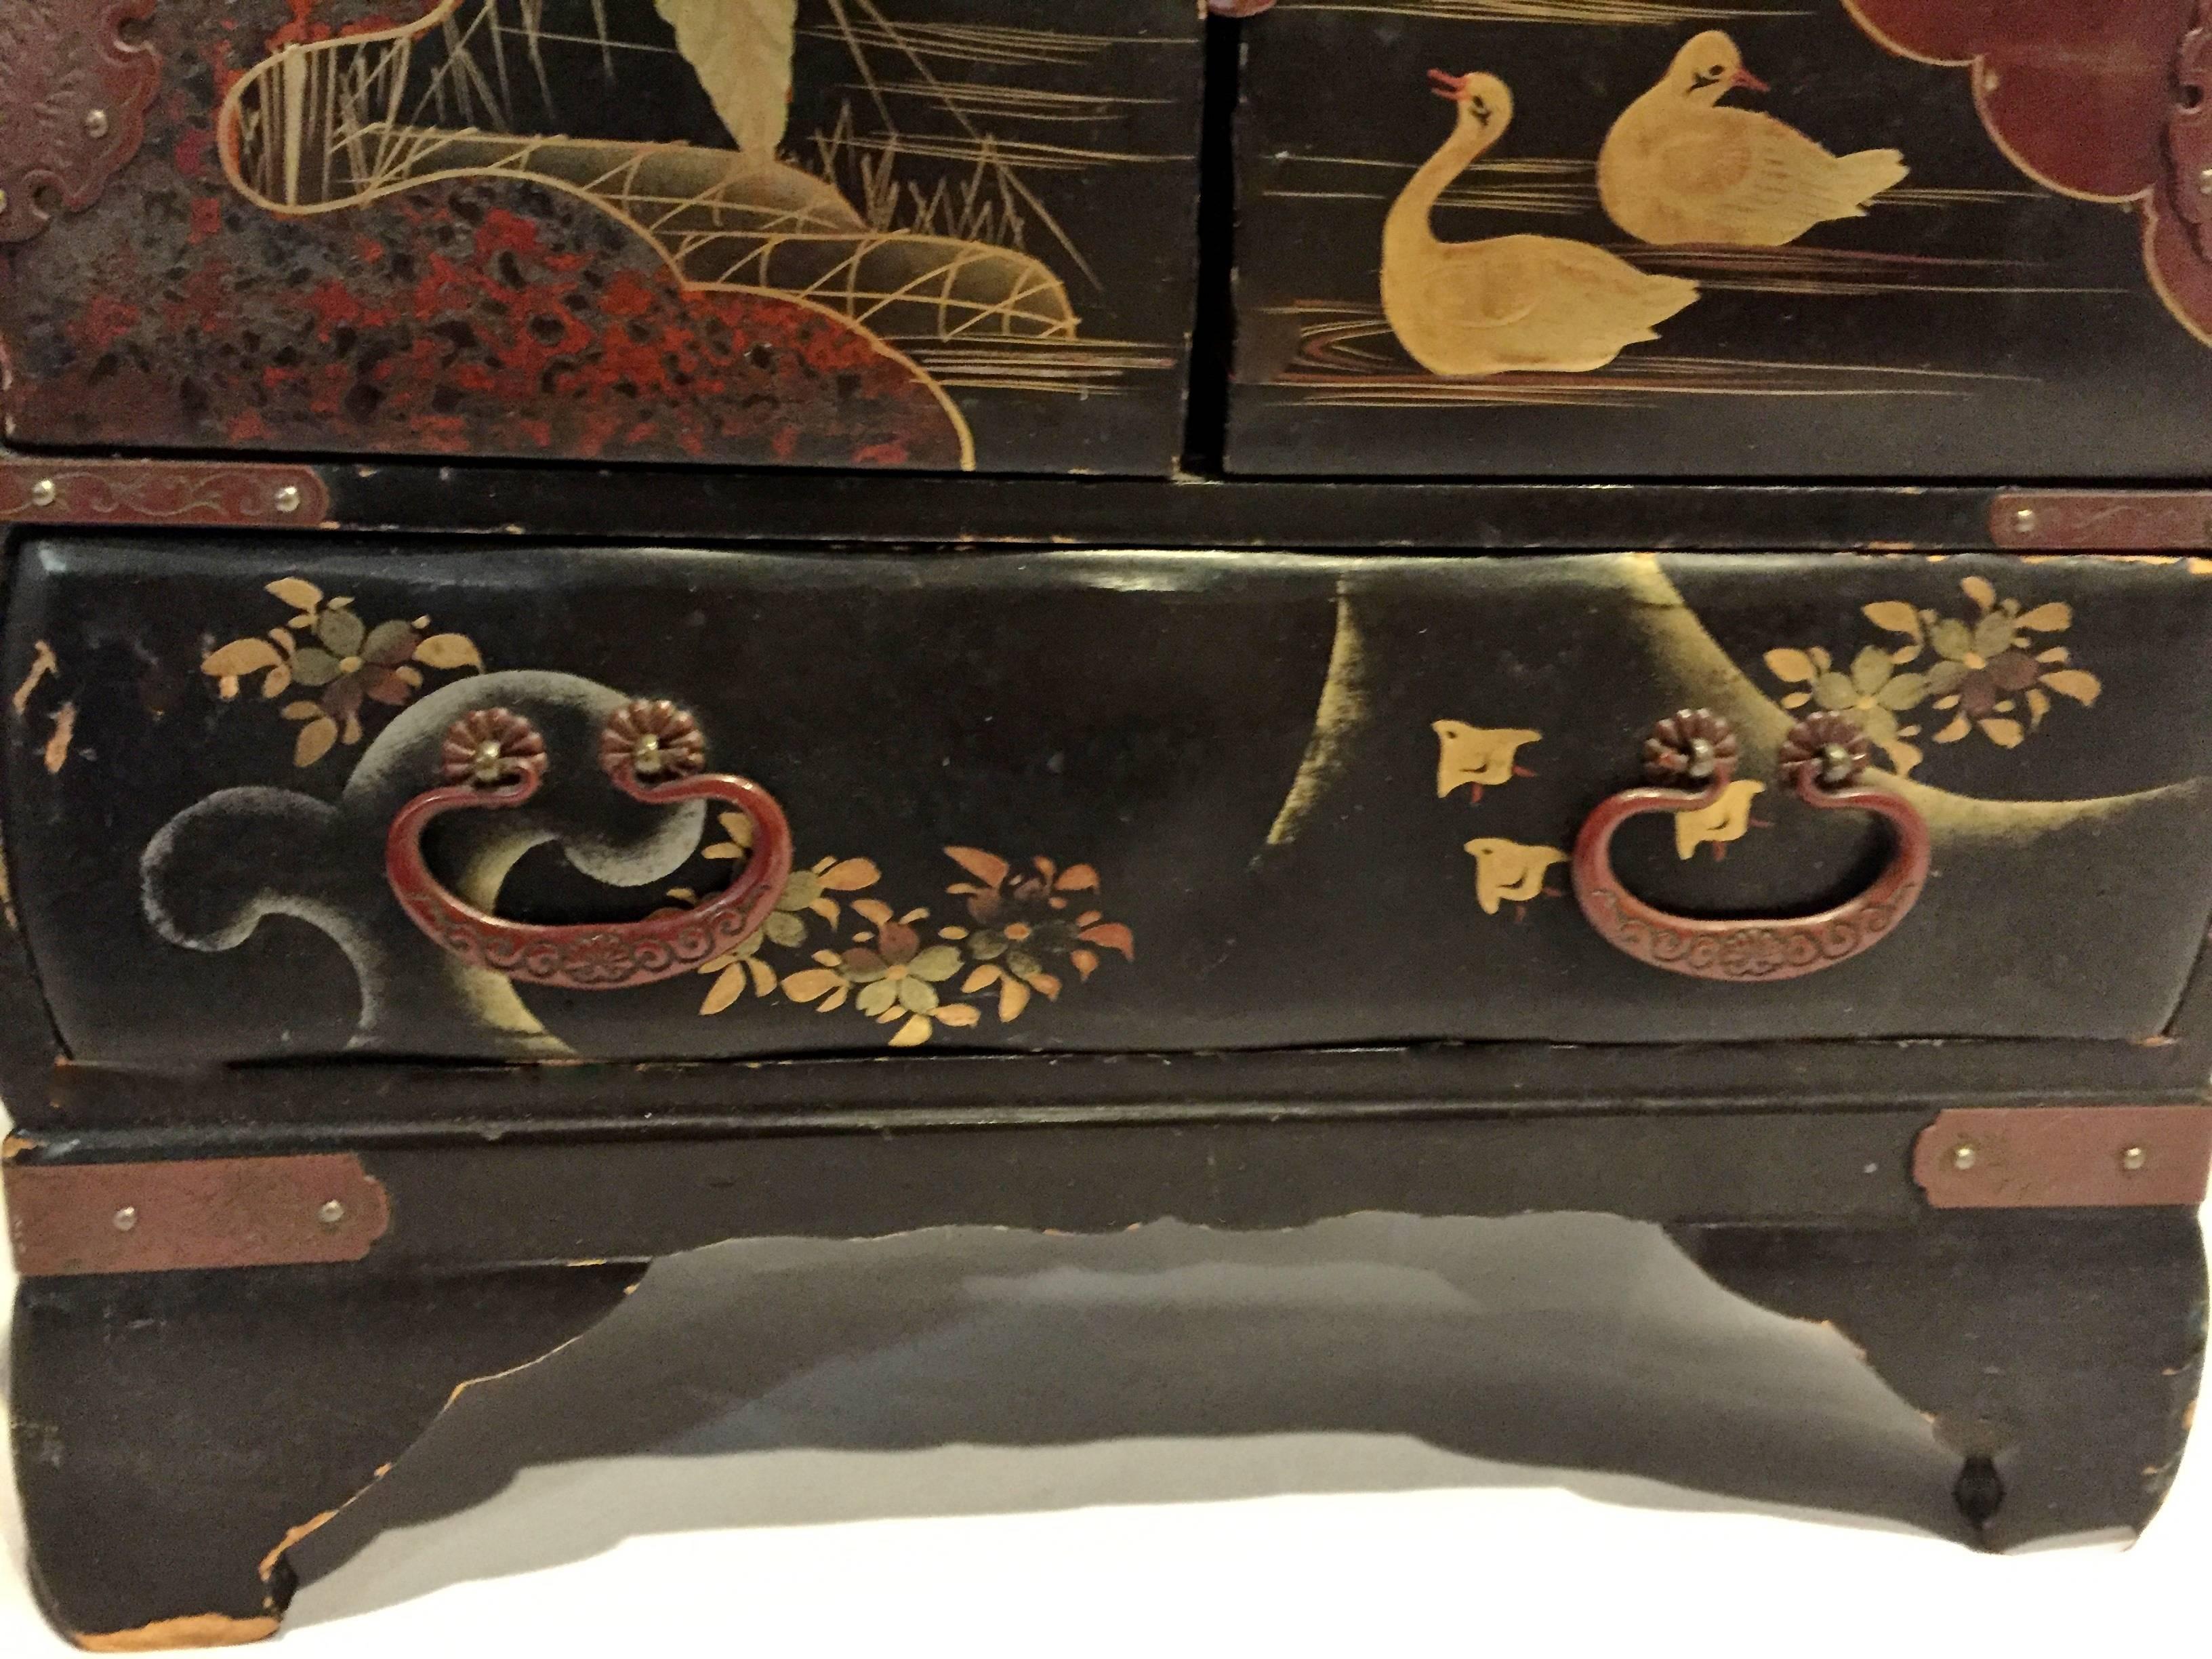 Wood Exquisite Japanese Lacquer Jewelry Box